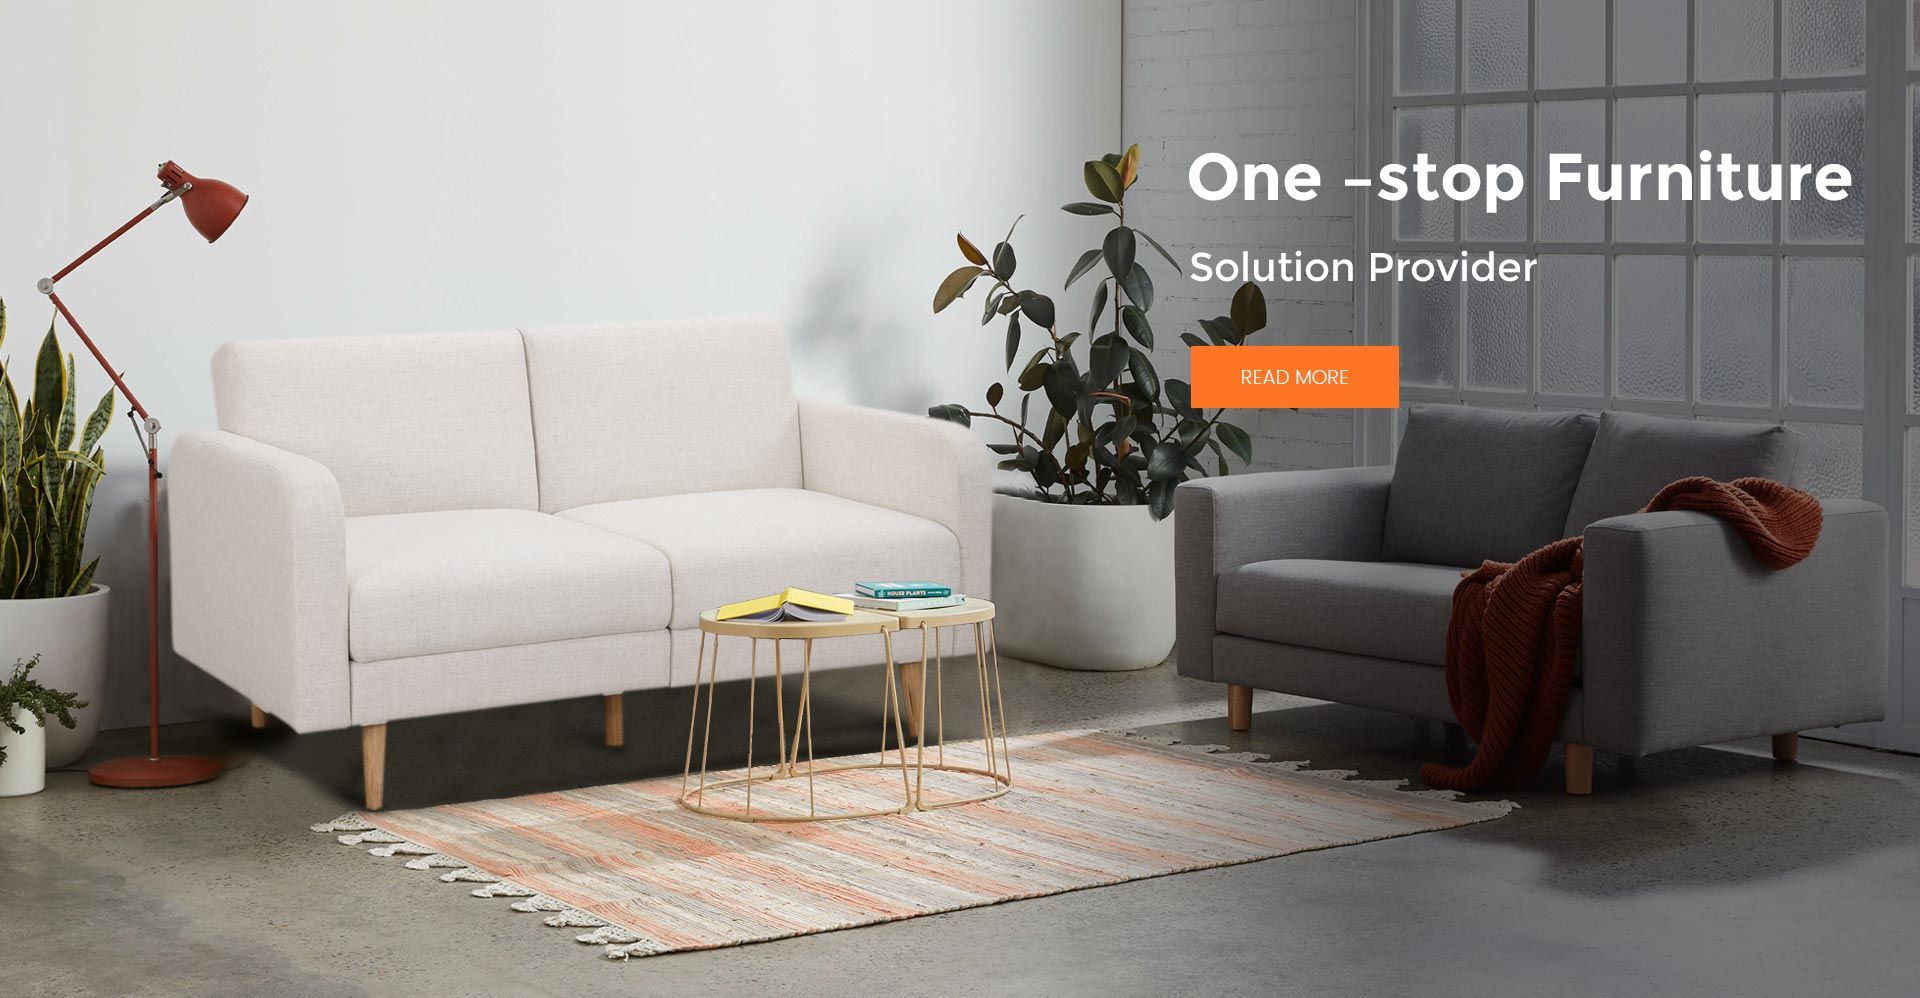 One-stop Furniture Solution Provider